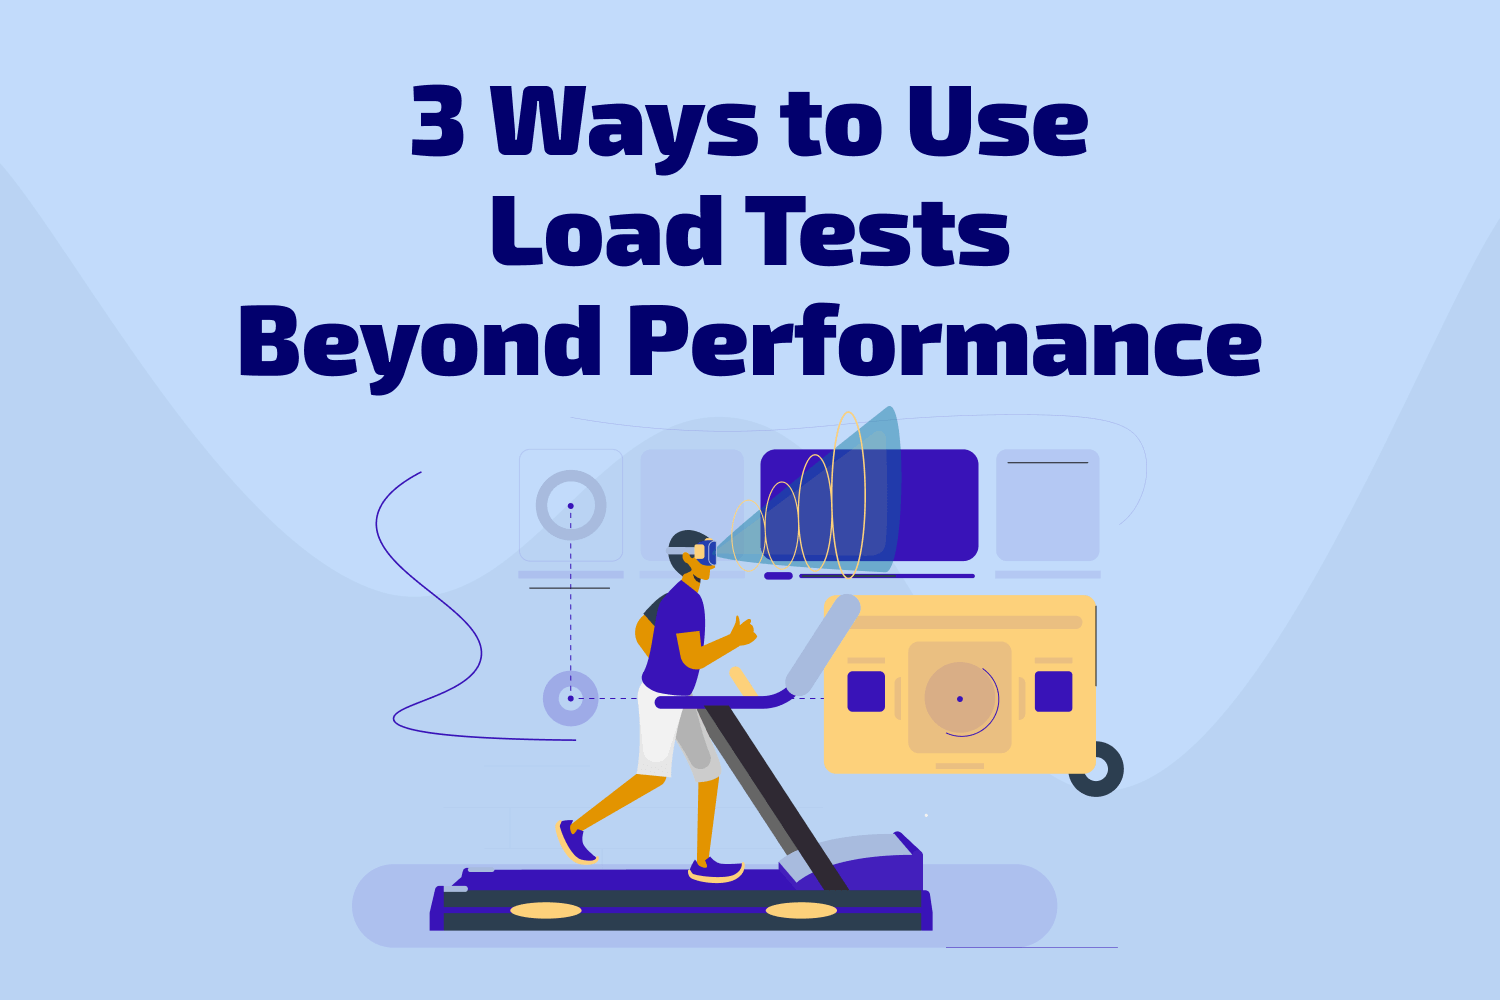 3 Ways to Use Load Tests Beyond Performance